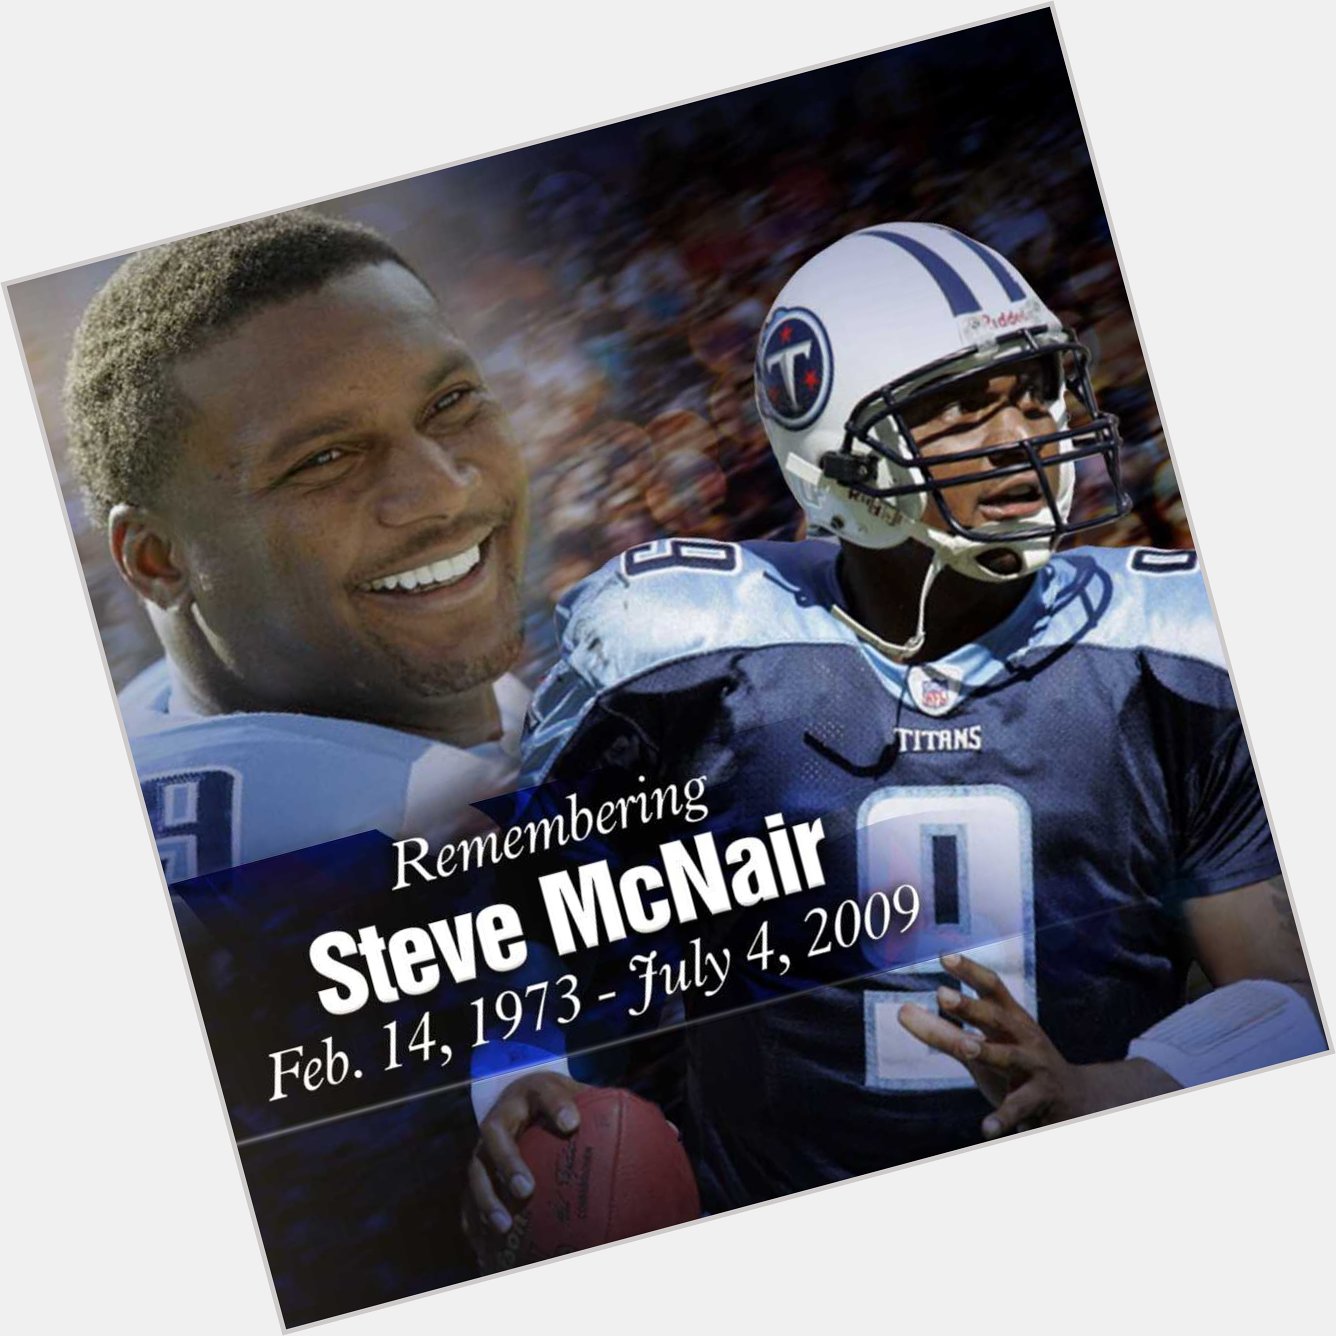 R.I.P Steve McNair and Happy Birthday Steve would have turned 50 today I bet he s slinging the football up there. 